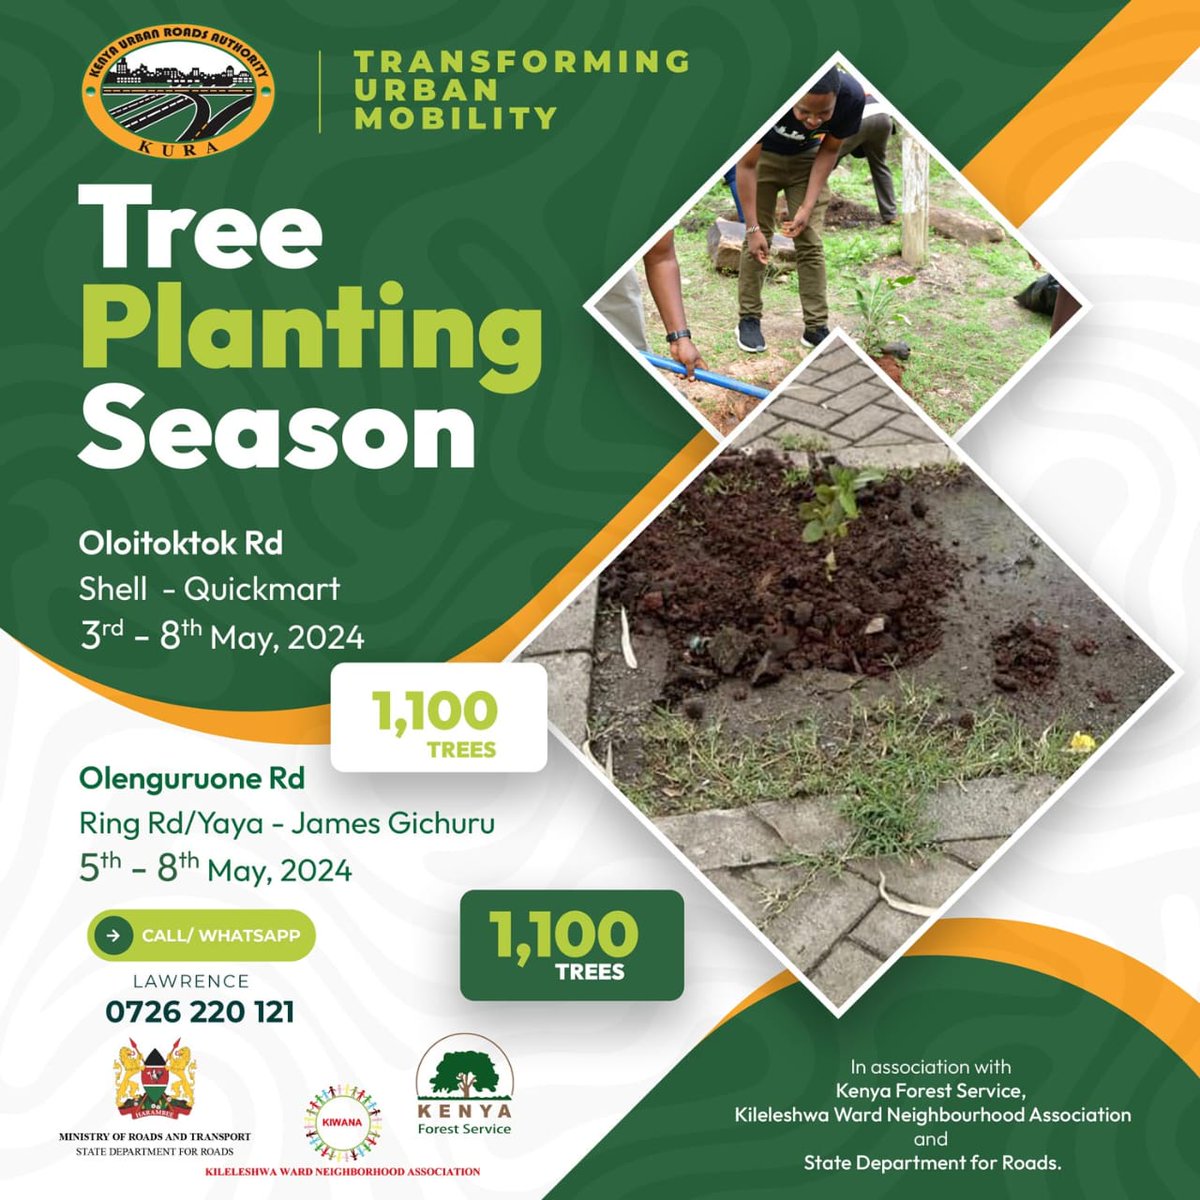 A big thank you to all our Stakeholders and like minded partners who teamed up with us in the recent Tree Planting Exercise within Nairobi and in other parts of the country. The initiative will play a big role towards combating climate change and ensuring we boost Kenya's Forest…